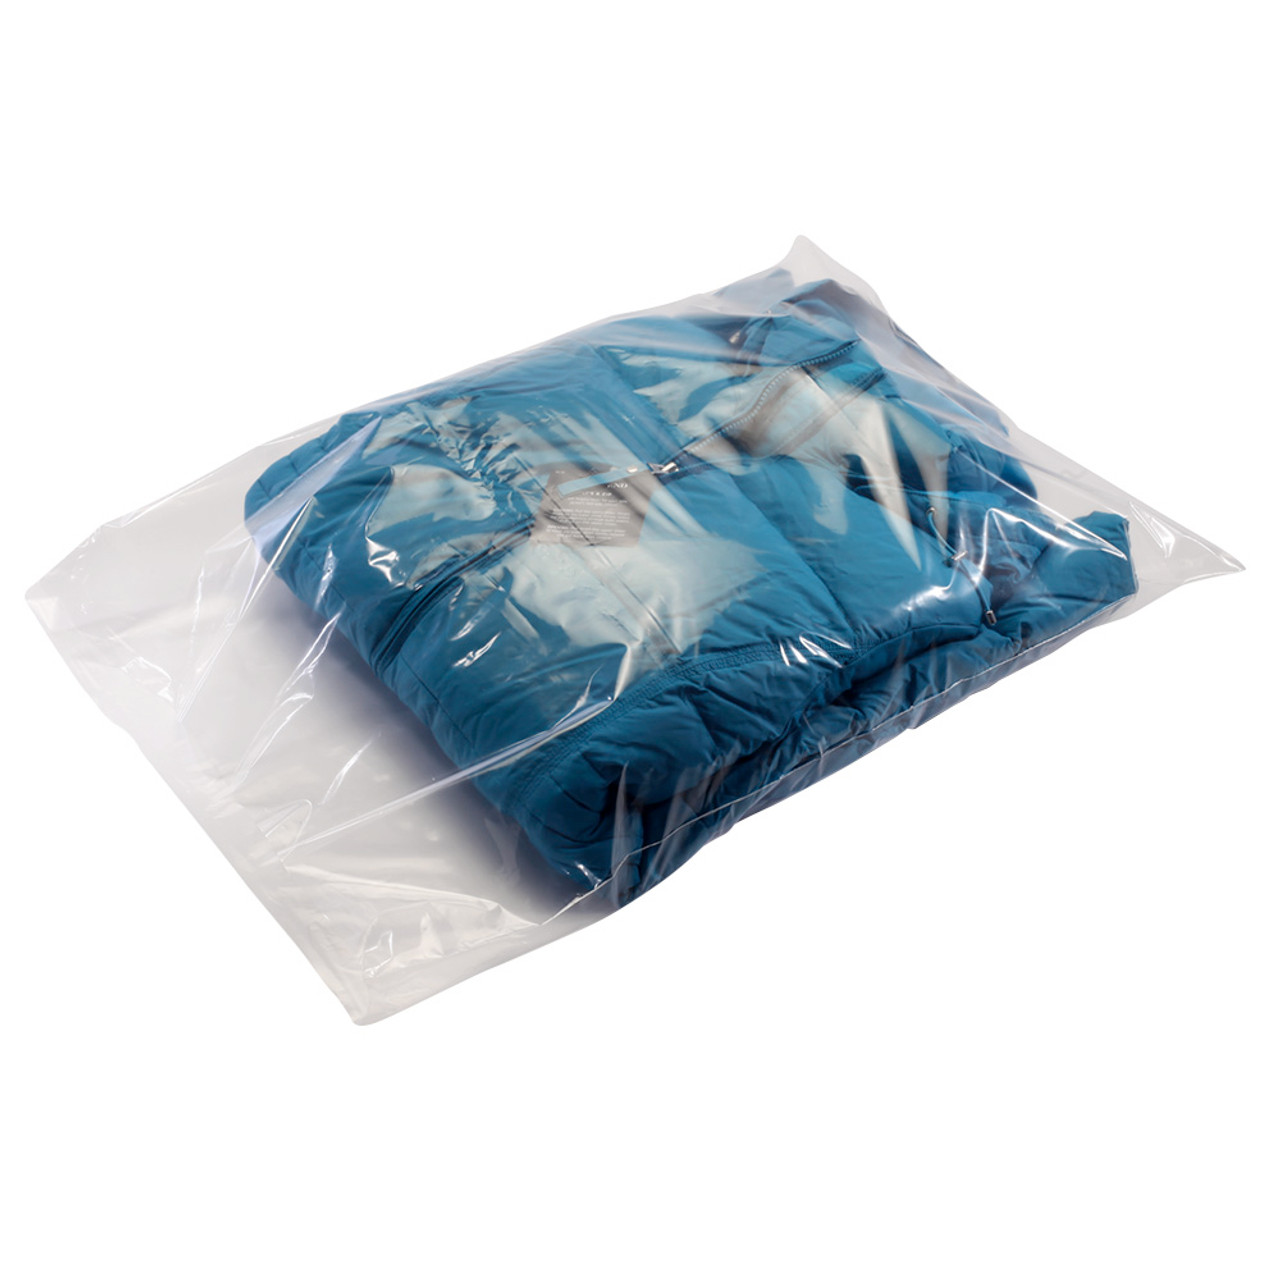 26X48 - 1.5 mil - clear - layflat poly bags - 250 bags/case